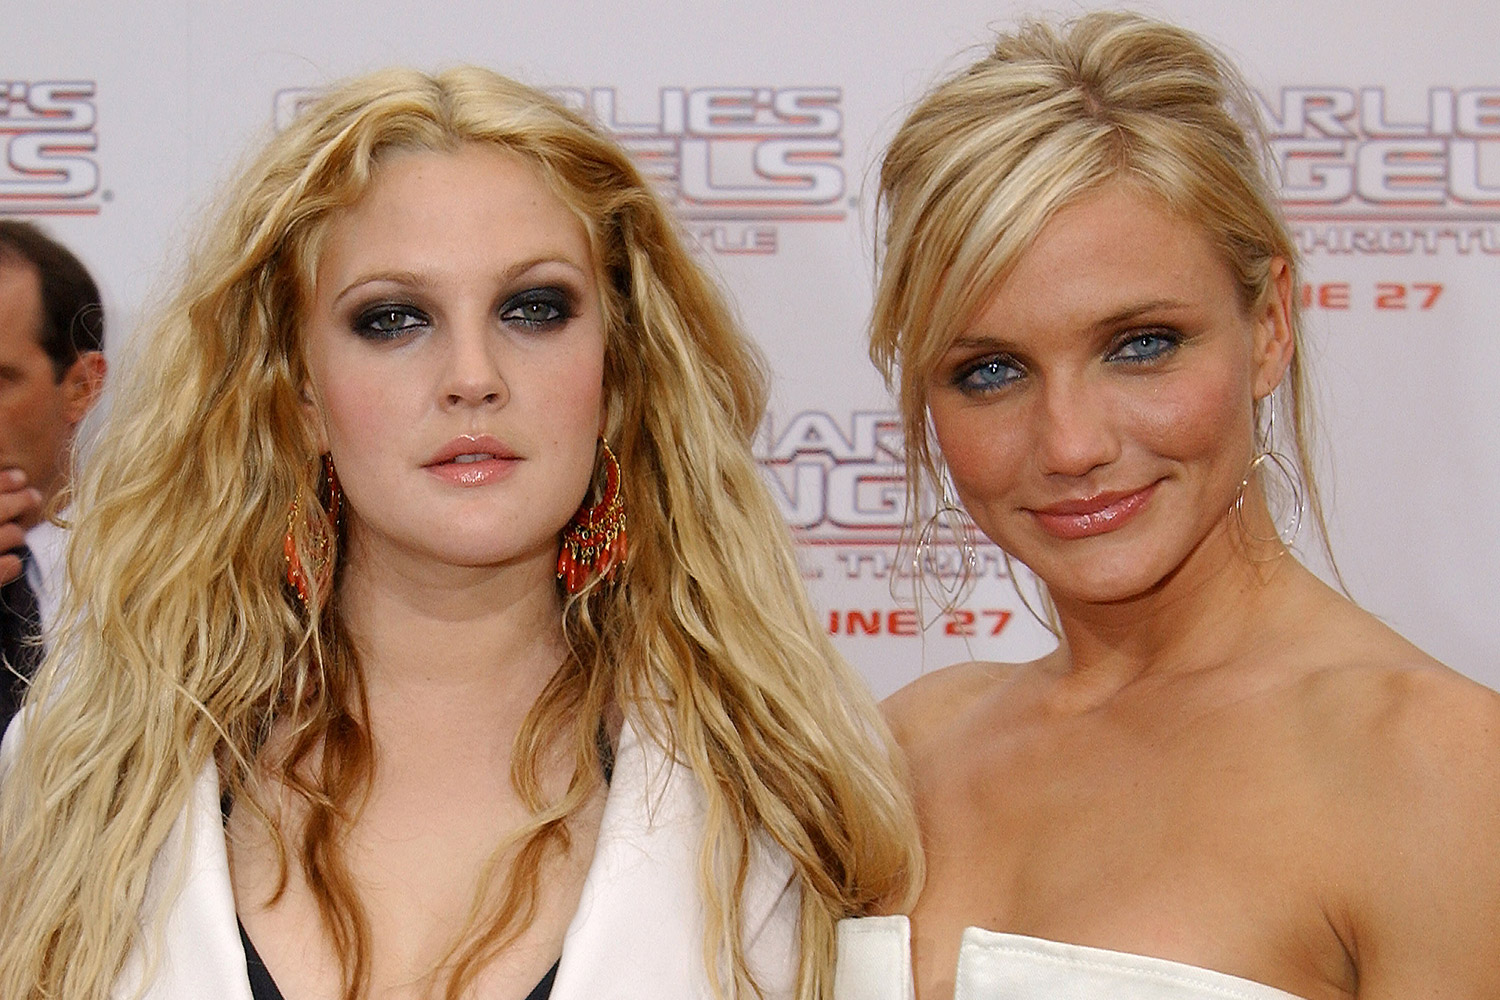 Drew Barrymore and Cameron Diaz Praised For Being Original And For Filterless Selfie by Fans!